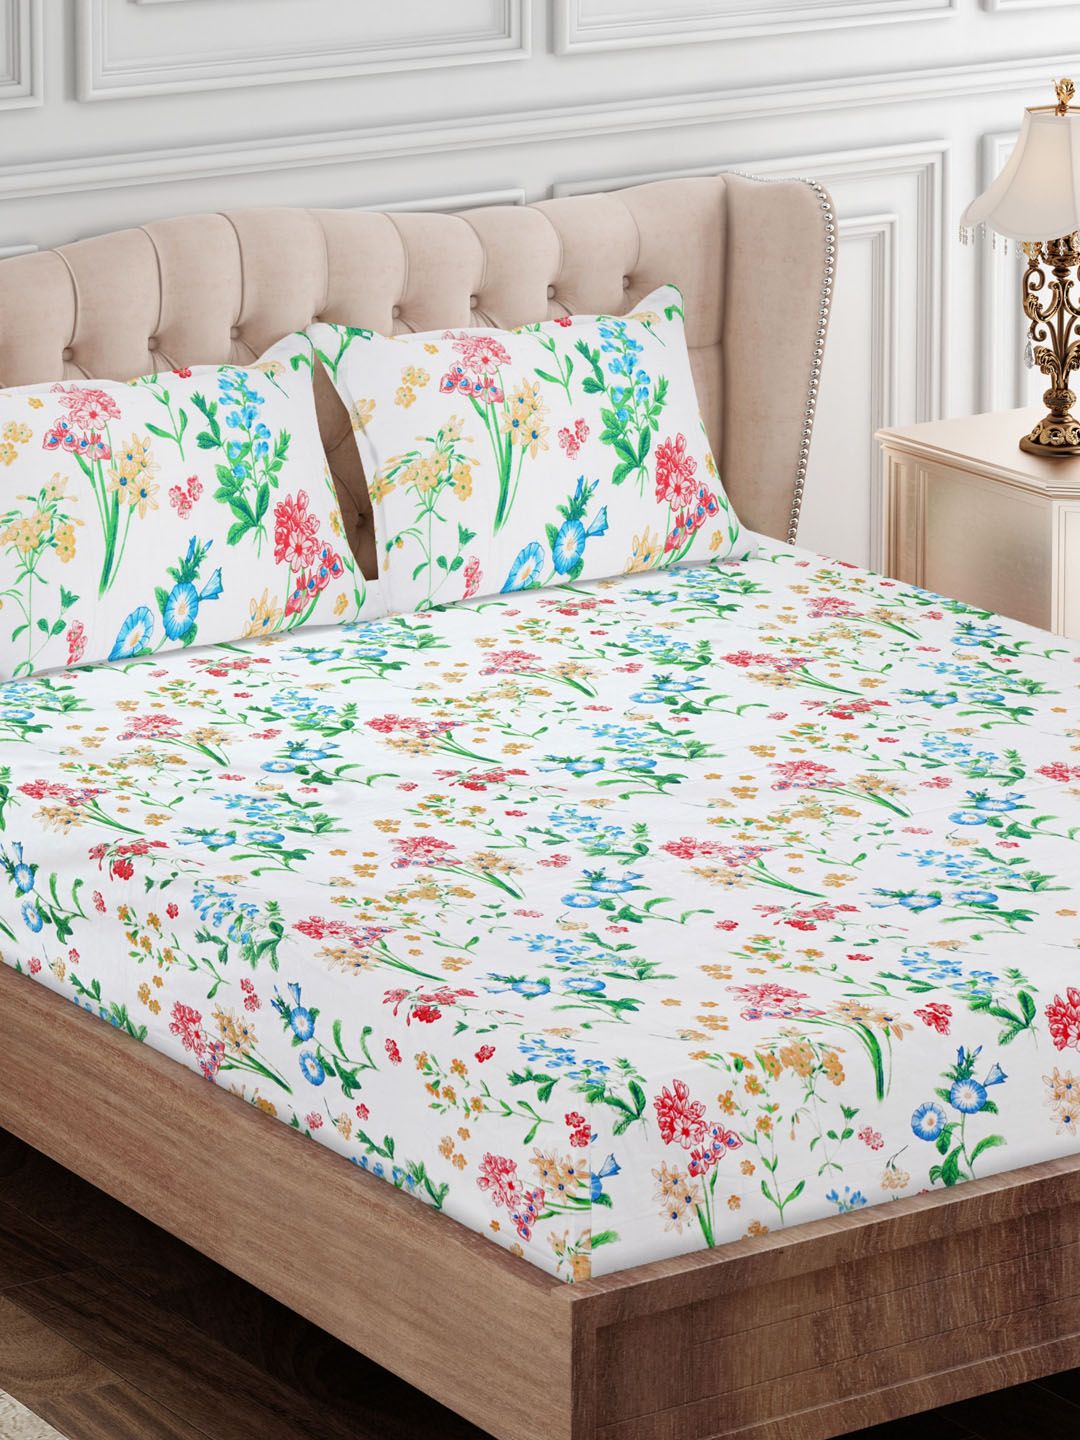 SEJ by Nisha Gupta White & Blue Floral 180 TC King Bedsheet with 2 Pillow Covers Price in India